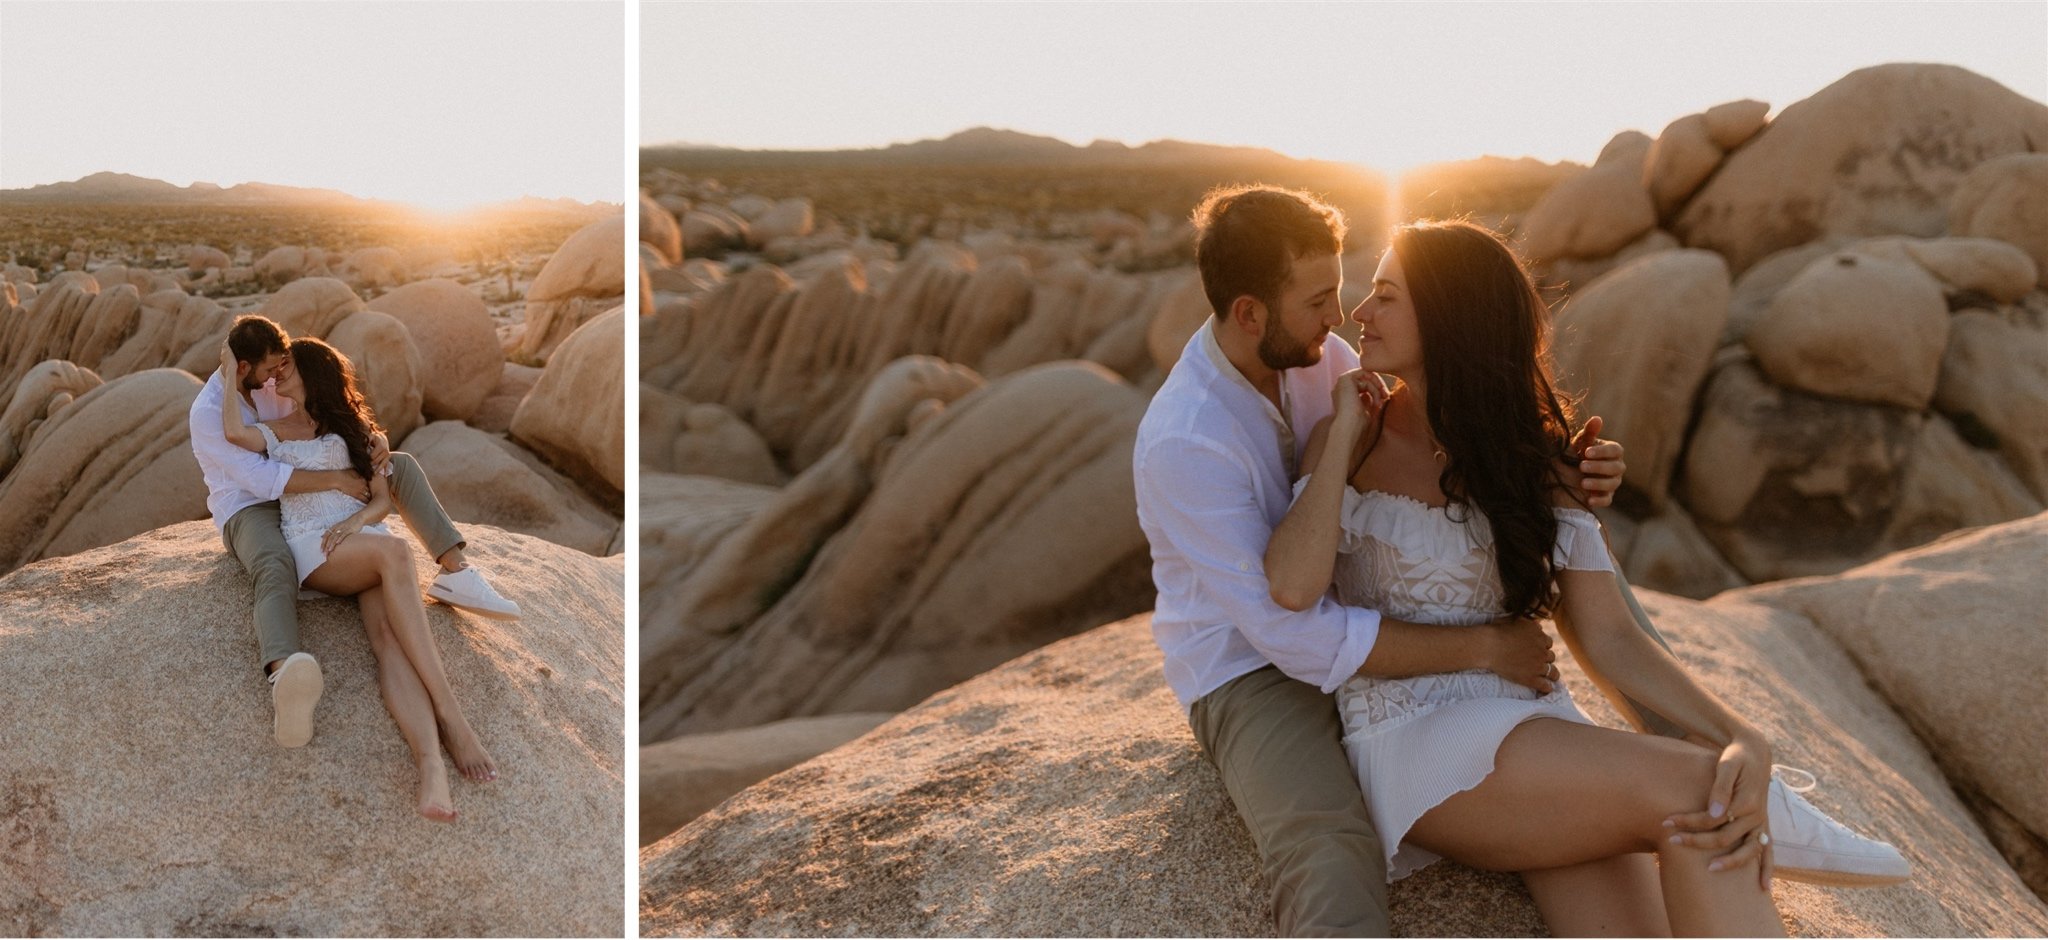 Joshua Tree Couples Session Surprise Proposal - Will Khoury Photography_40.jpg